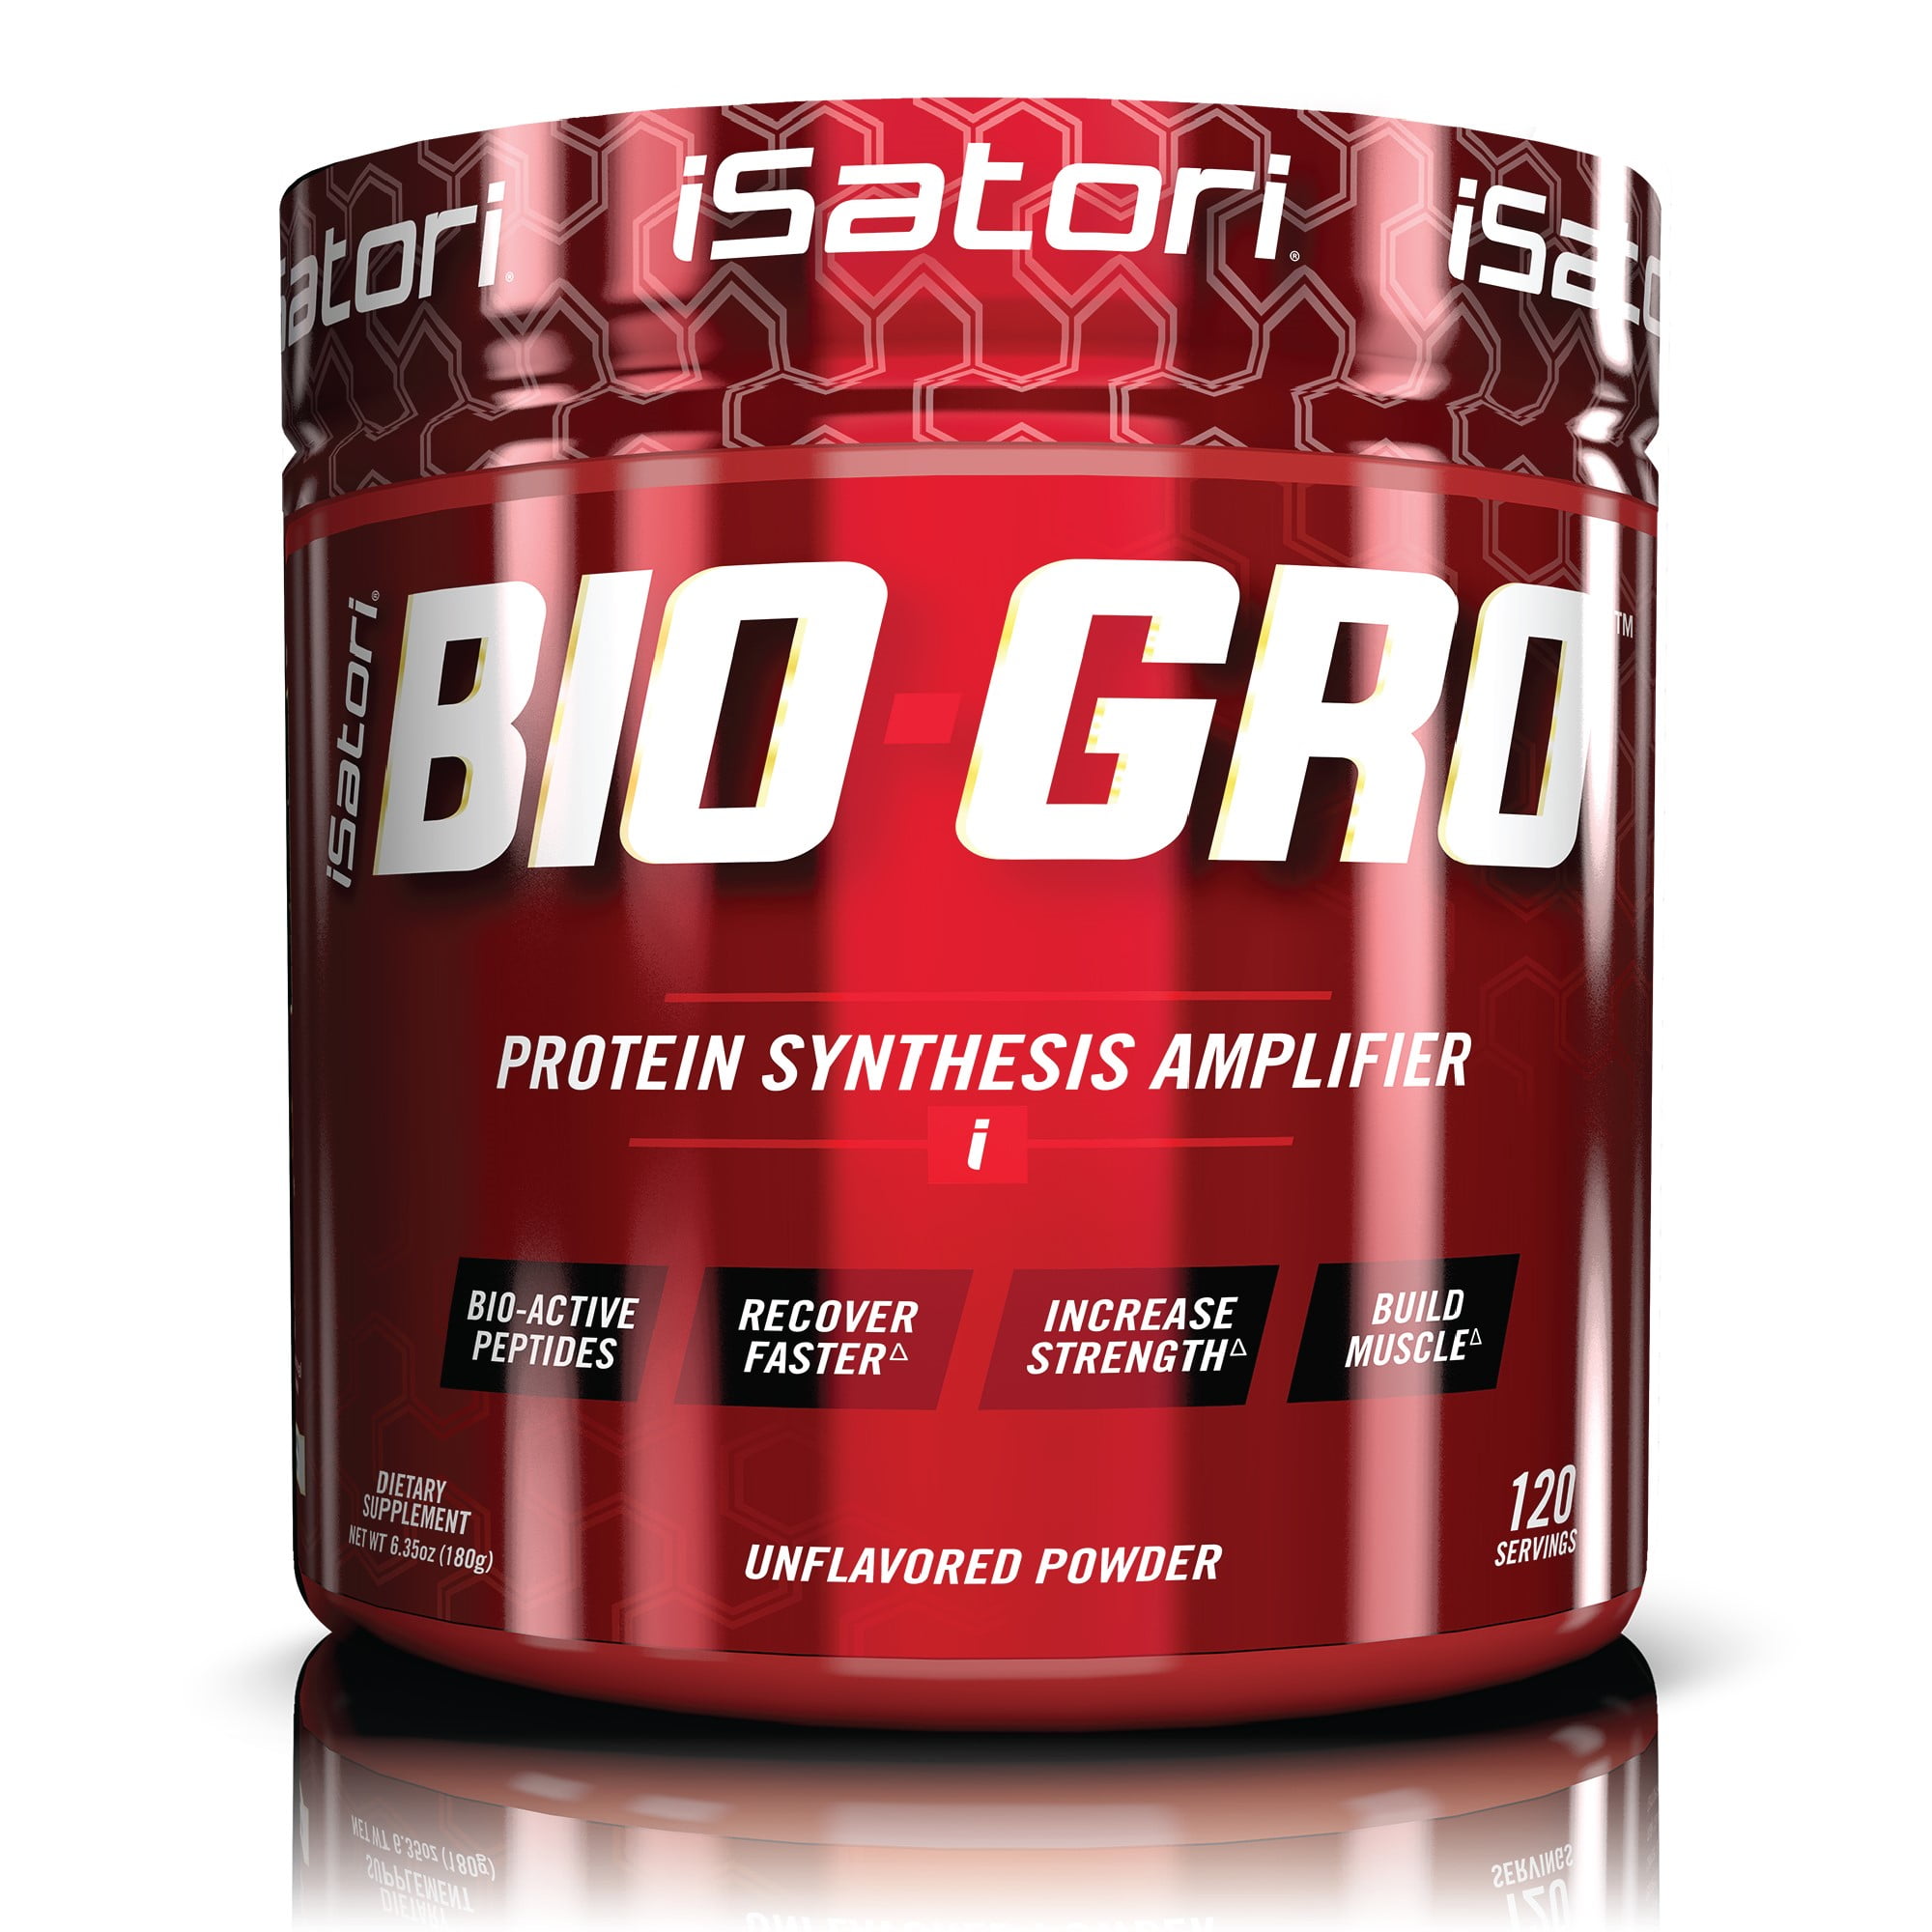 Isatori Bio Gro Protein Synthesis Amplifier Designed To Build Lean Muscle Speed Recovery And Increase Strength Bio Active Proline Rich Peptides Dietary Supplement Unflavored 120 Servings Walmart Com